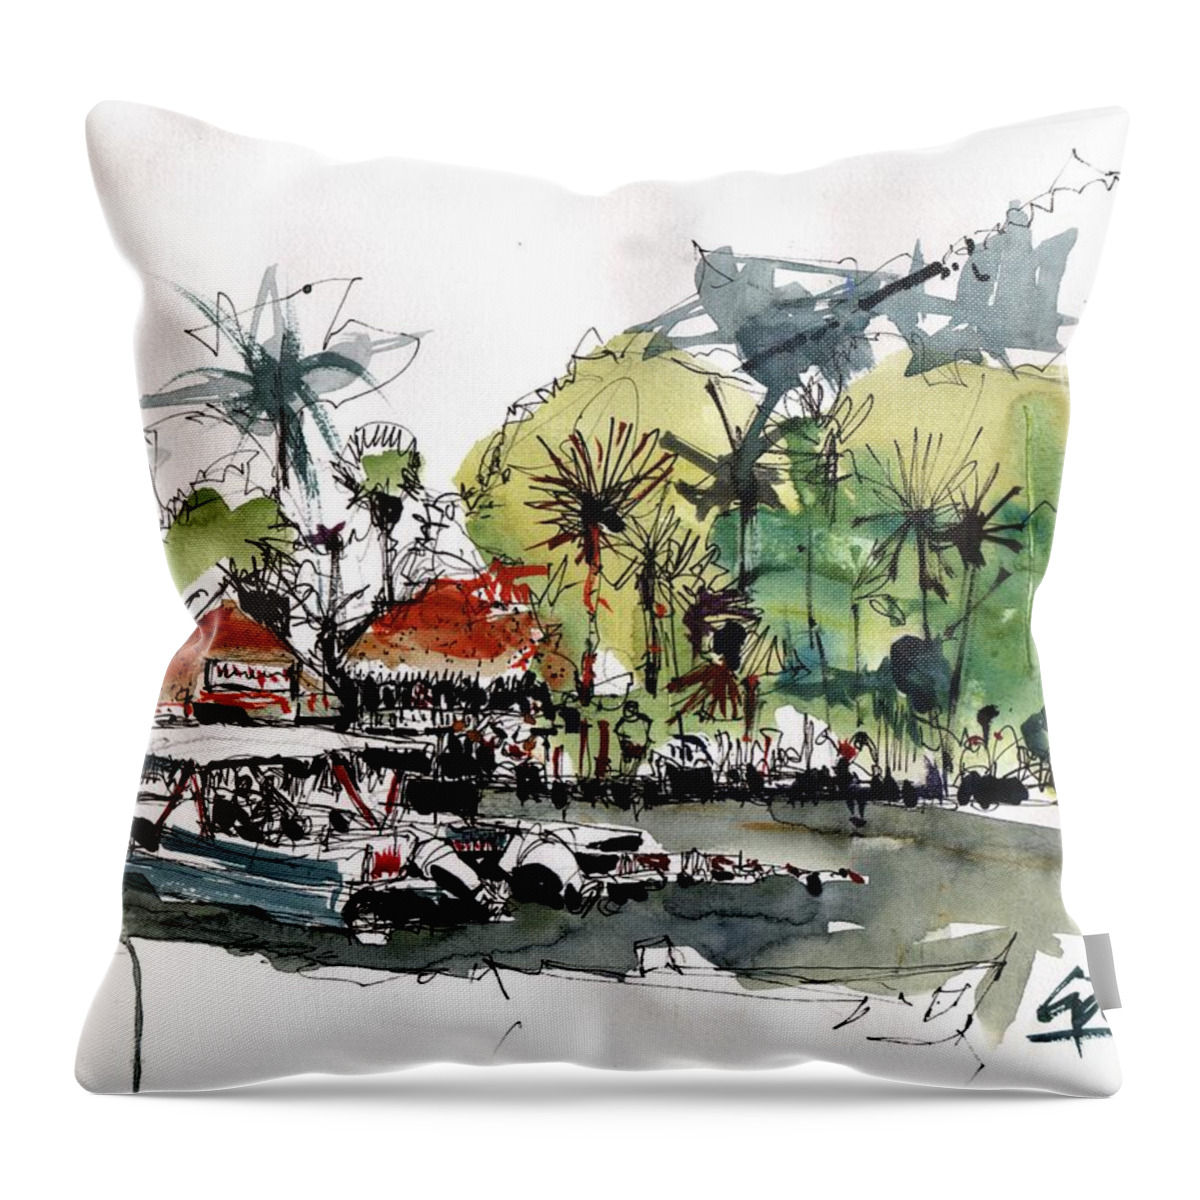  Throw Pillow featuring the painting Sarasota Pier by Gaston McKenzie